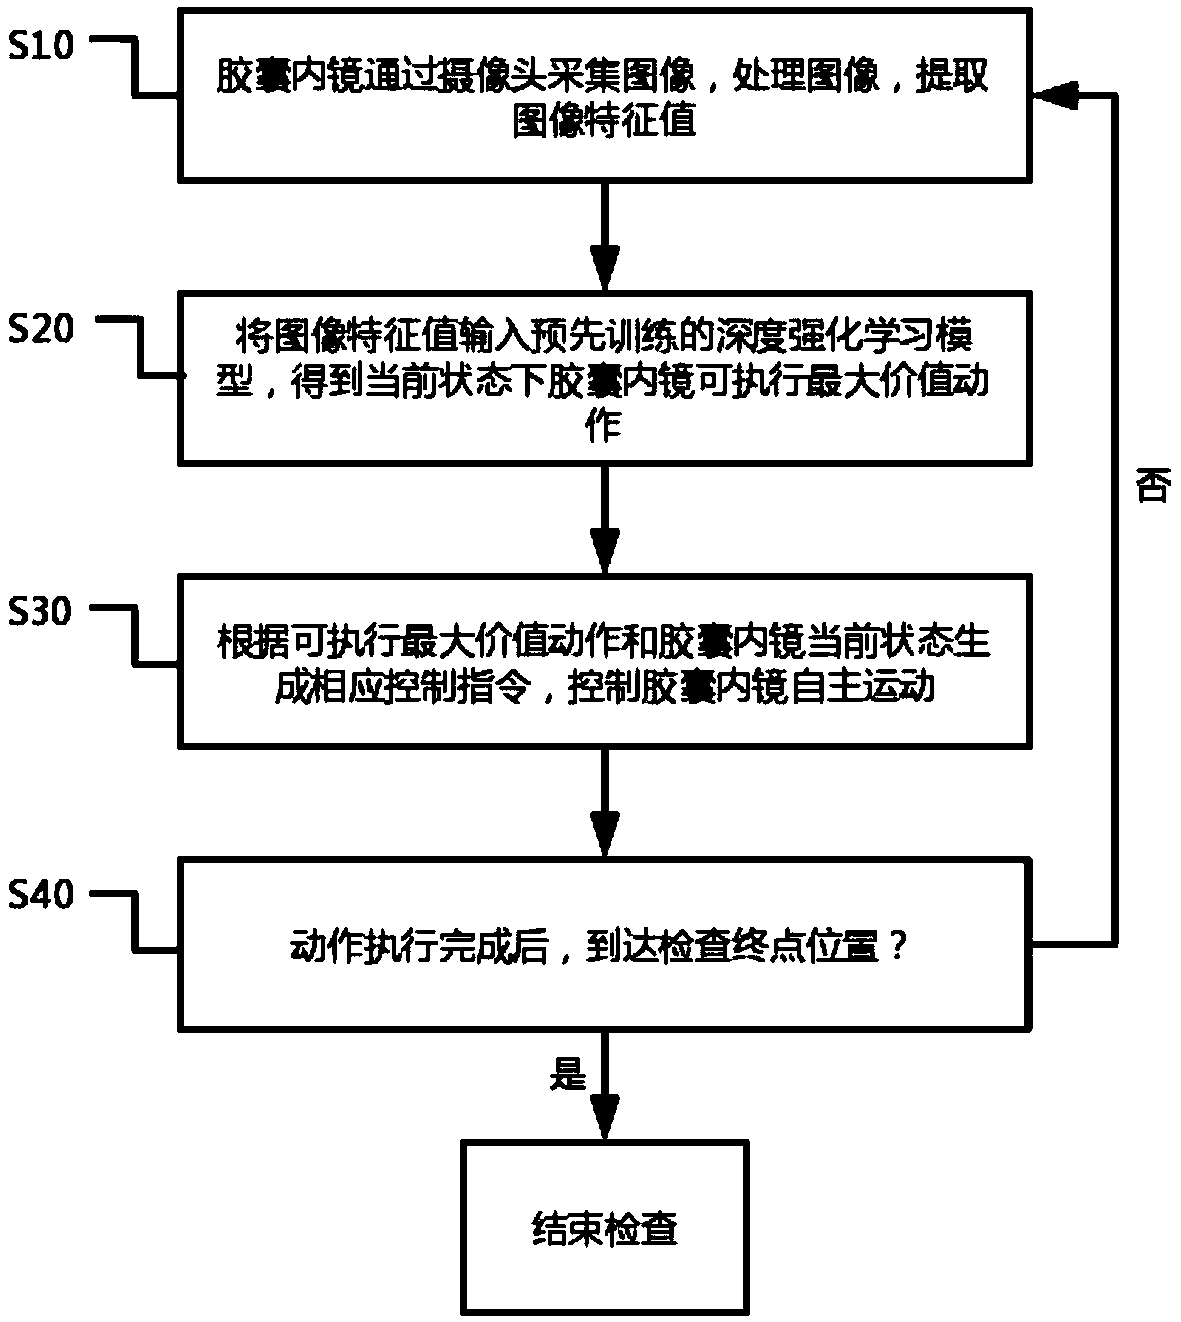 Artificial intelligence capsule endoscopy examination method and system based on deep reinforcement learning